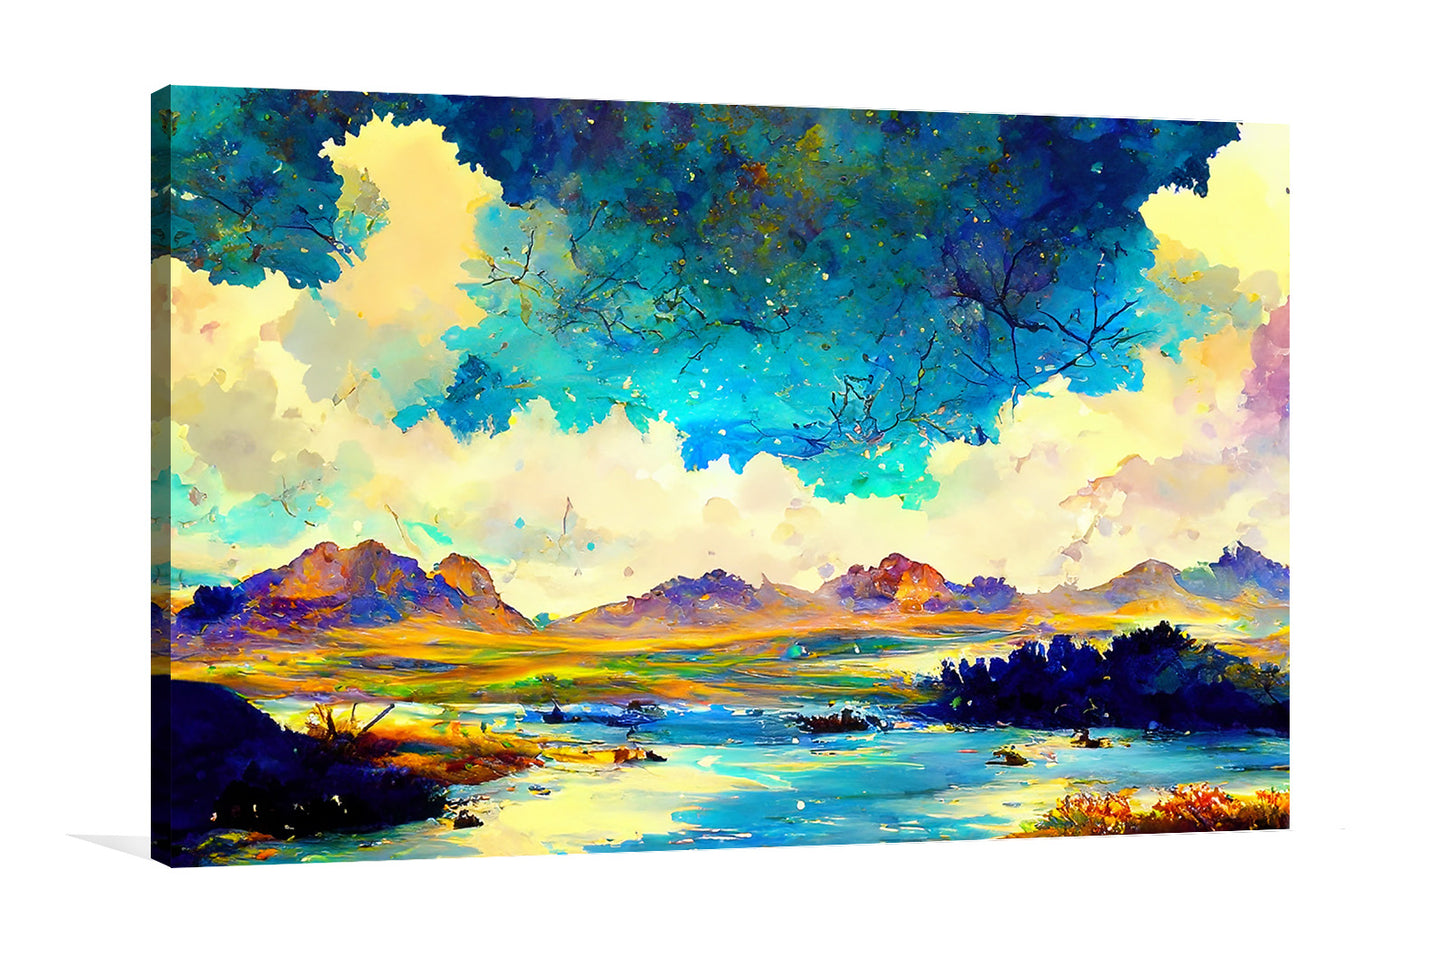 How to Paint Mountains With Watercolor - Watercolor Landscapes Tutorial